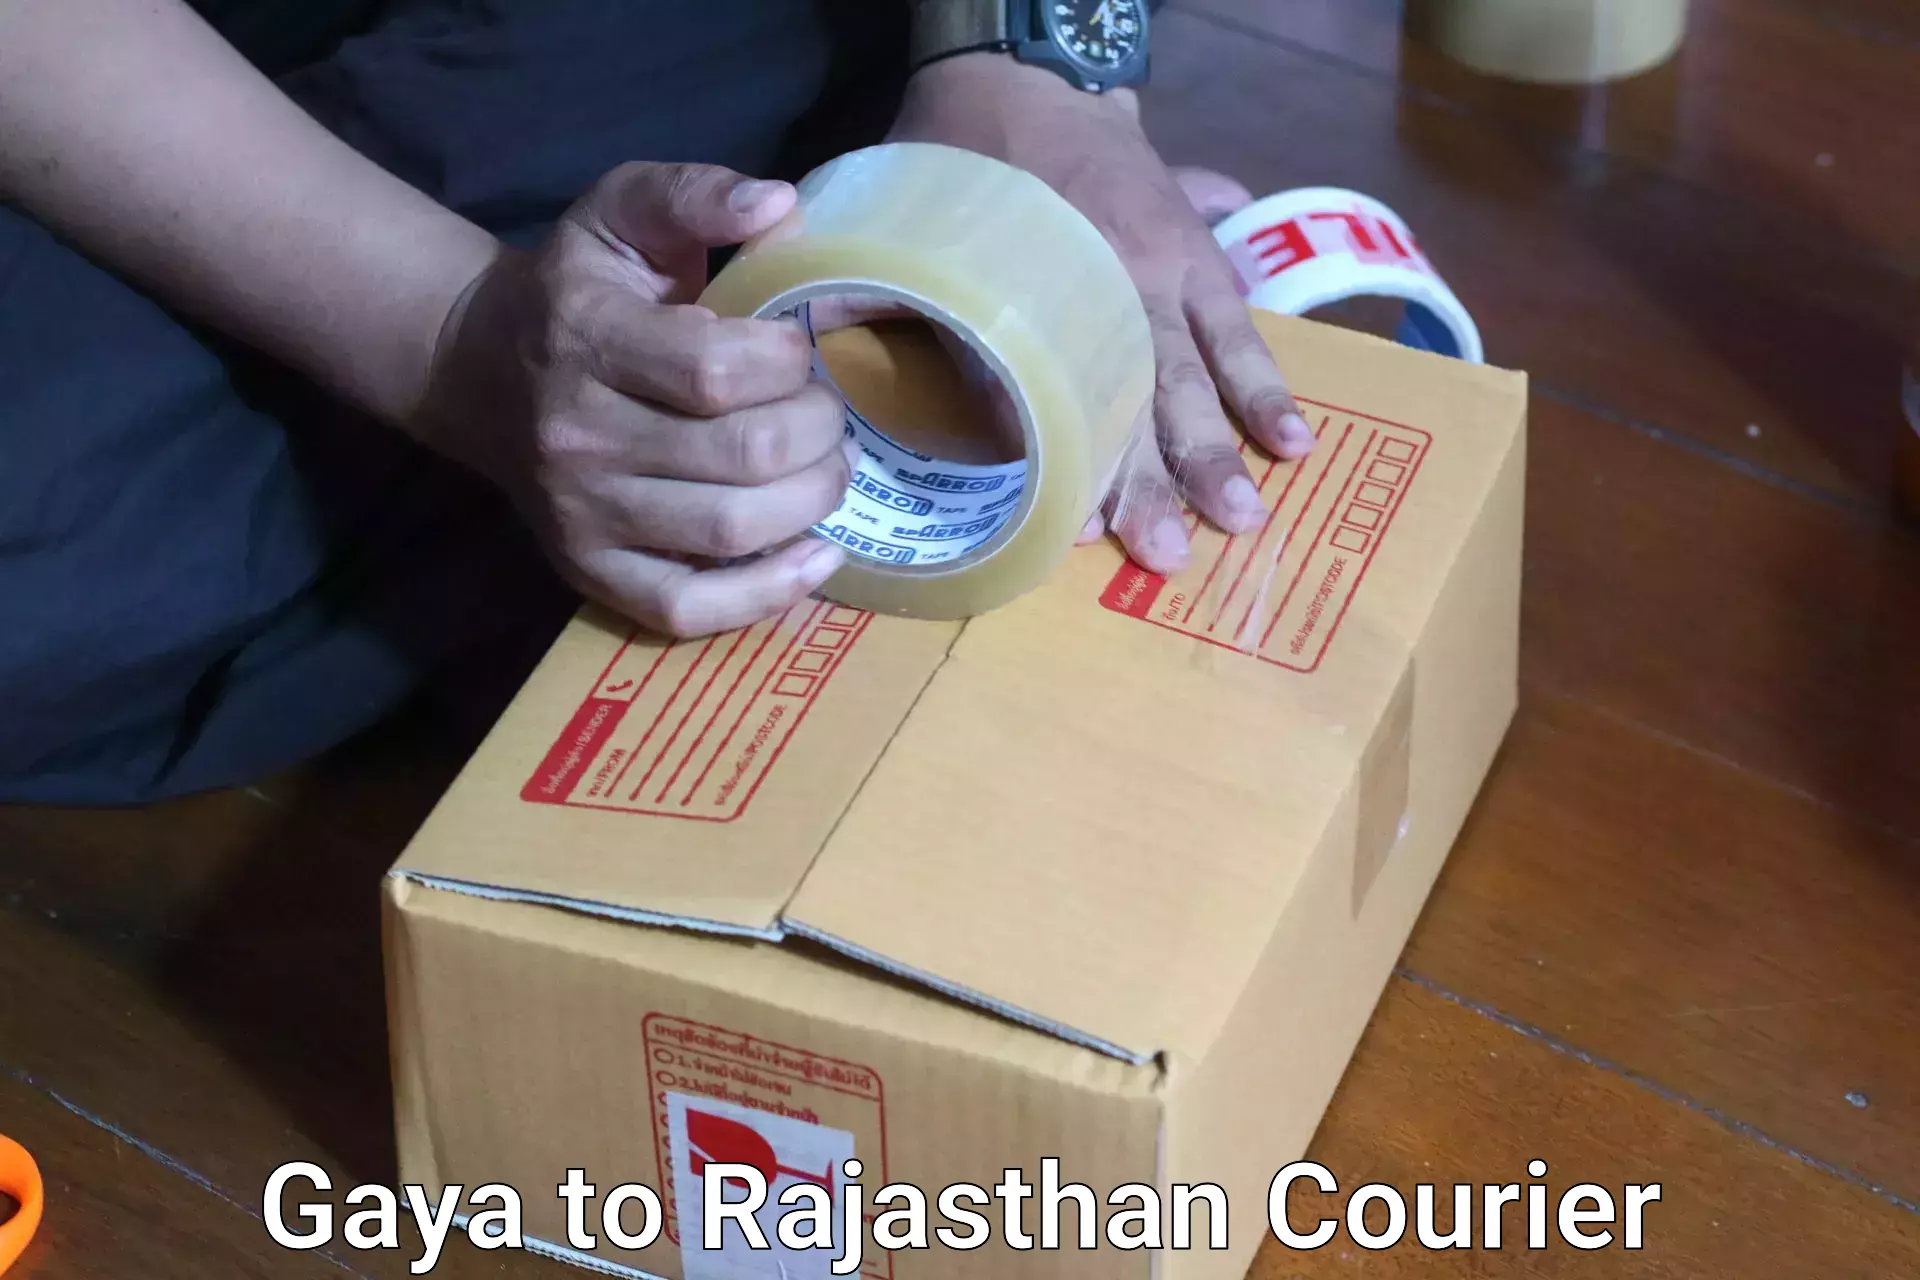 Luggage delivery providers Gaya to Rajasthan